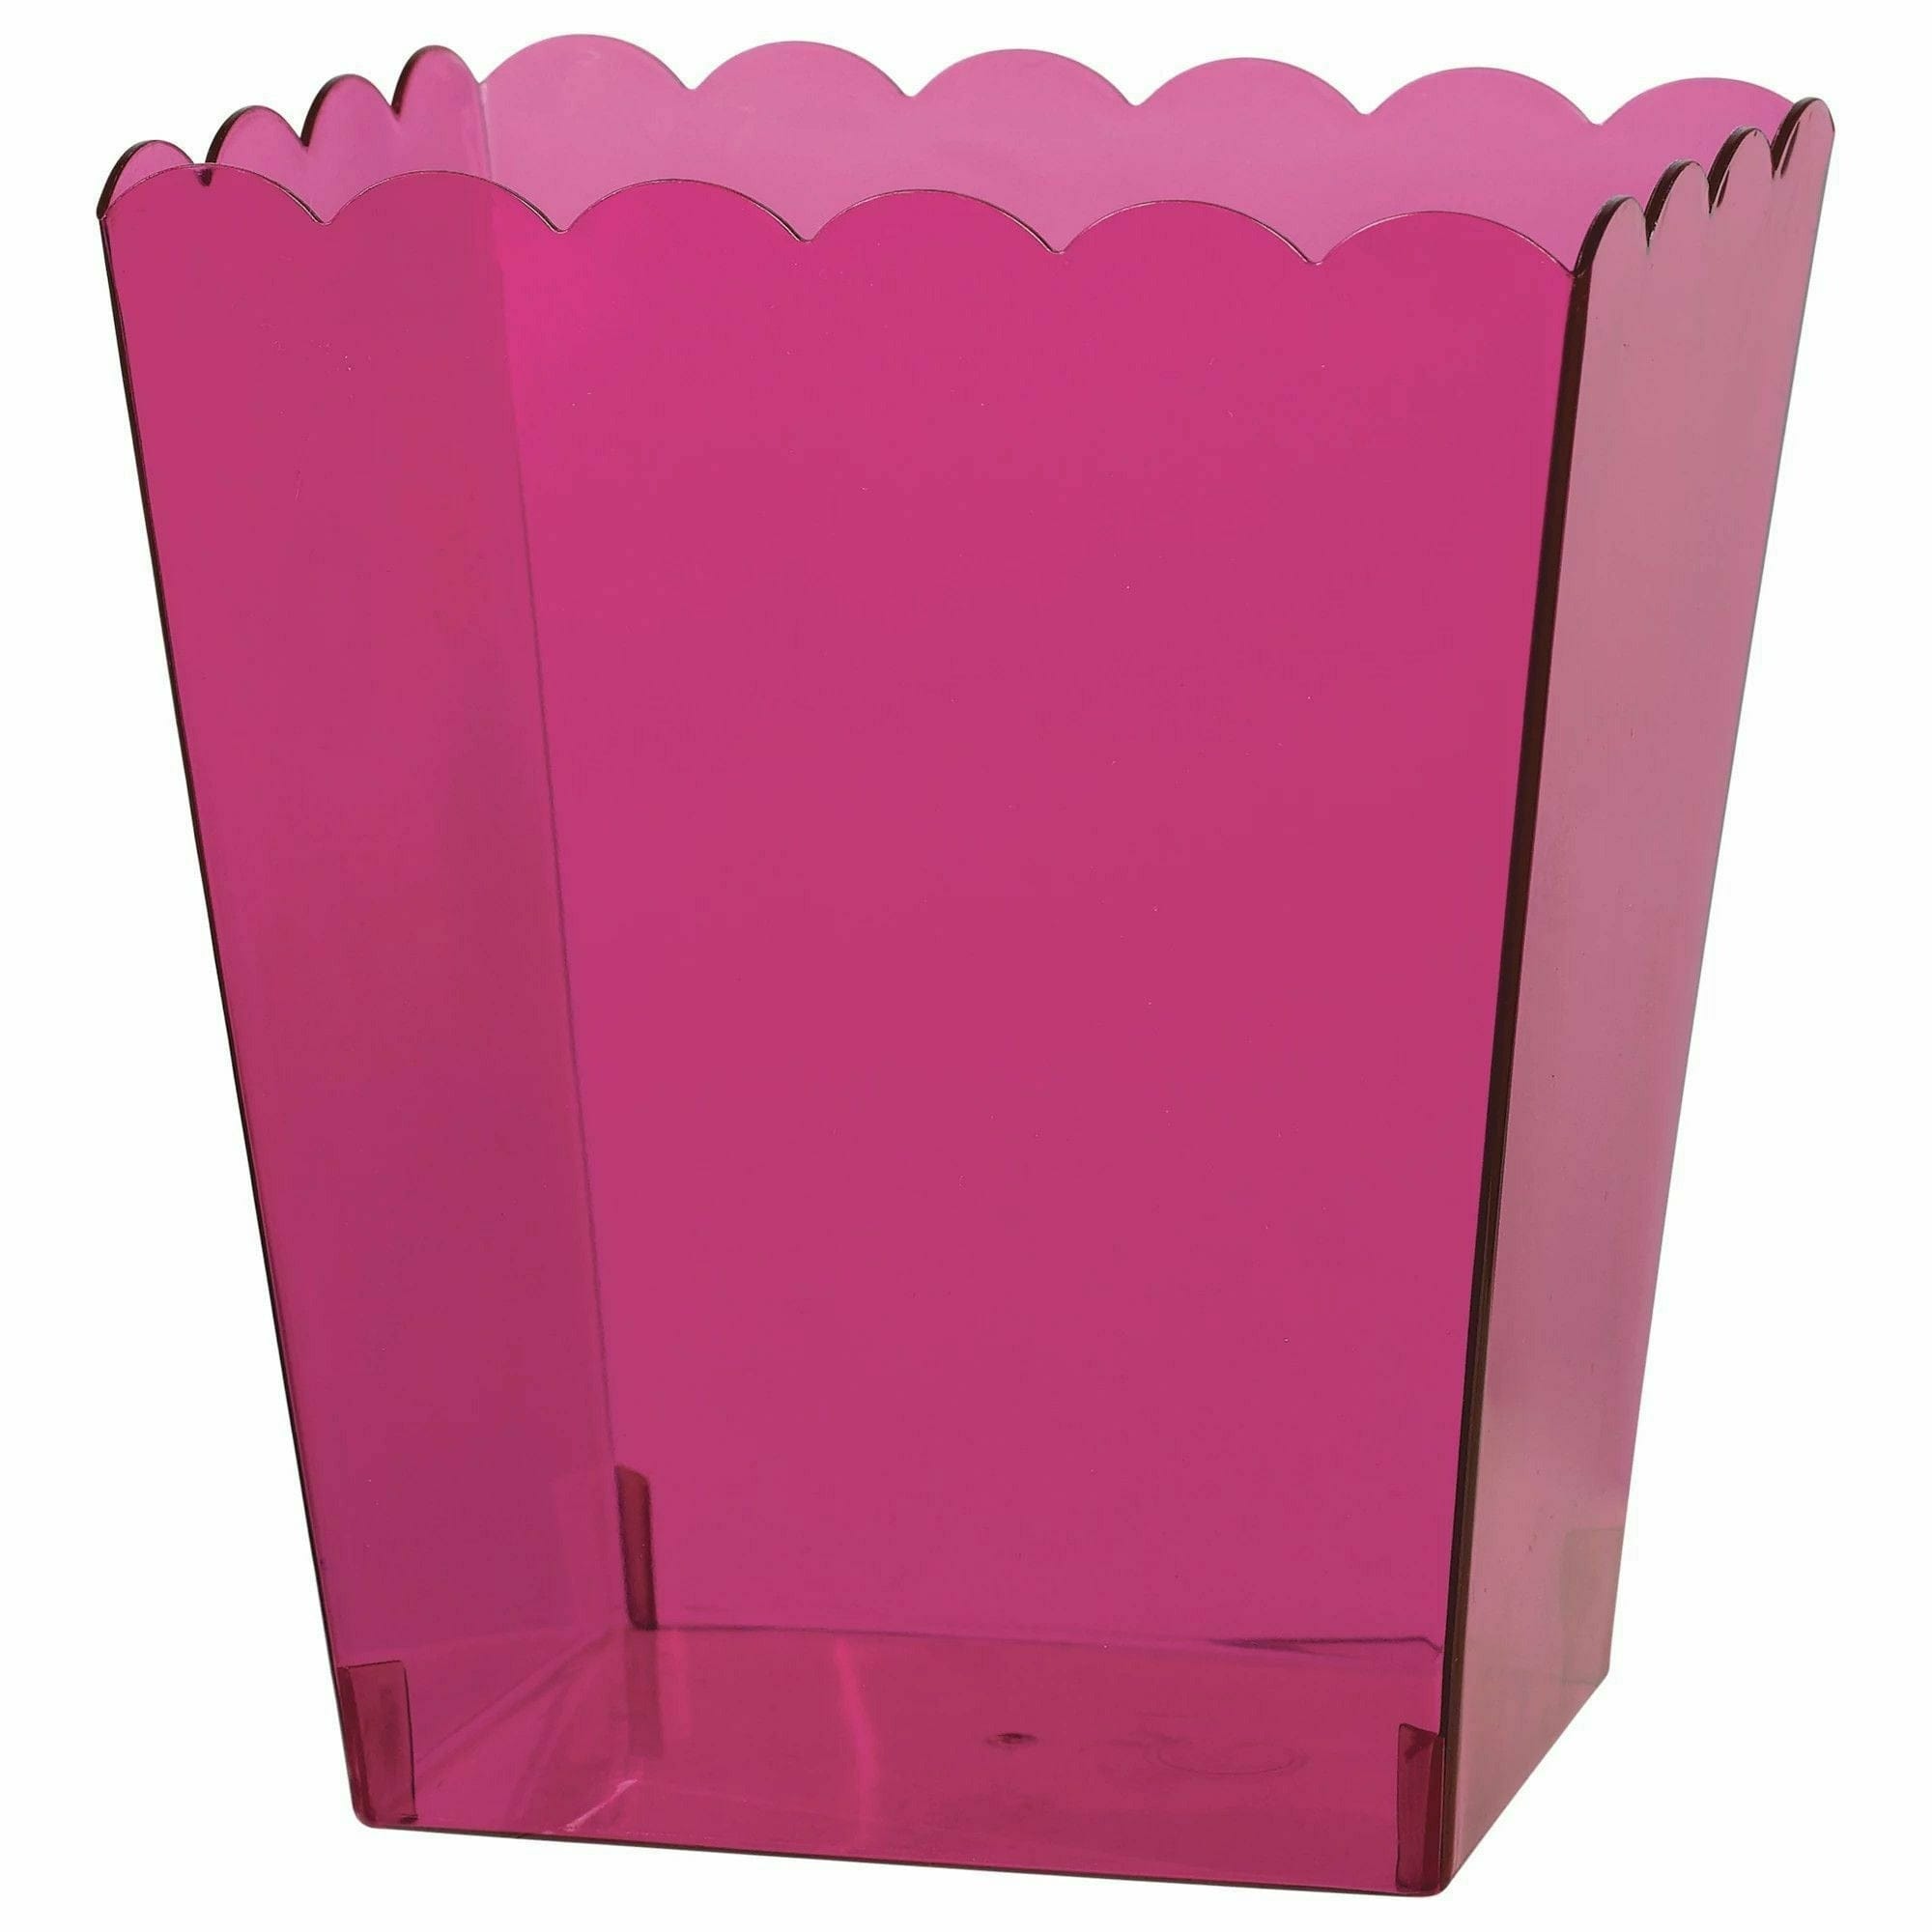 Amscan BASIC Medium Scalloped Container Bright Pink